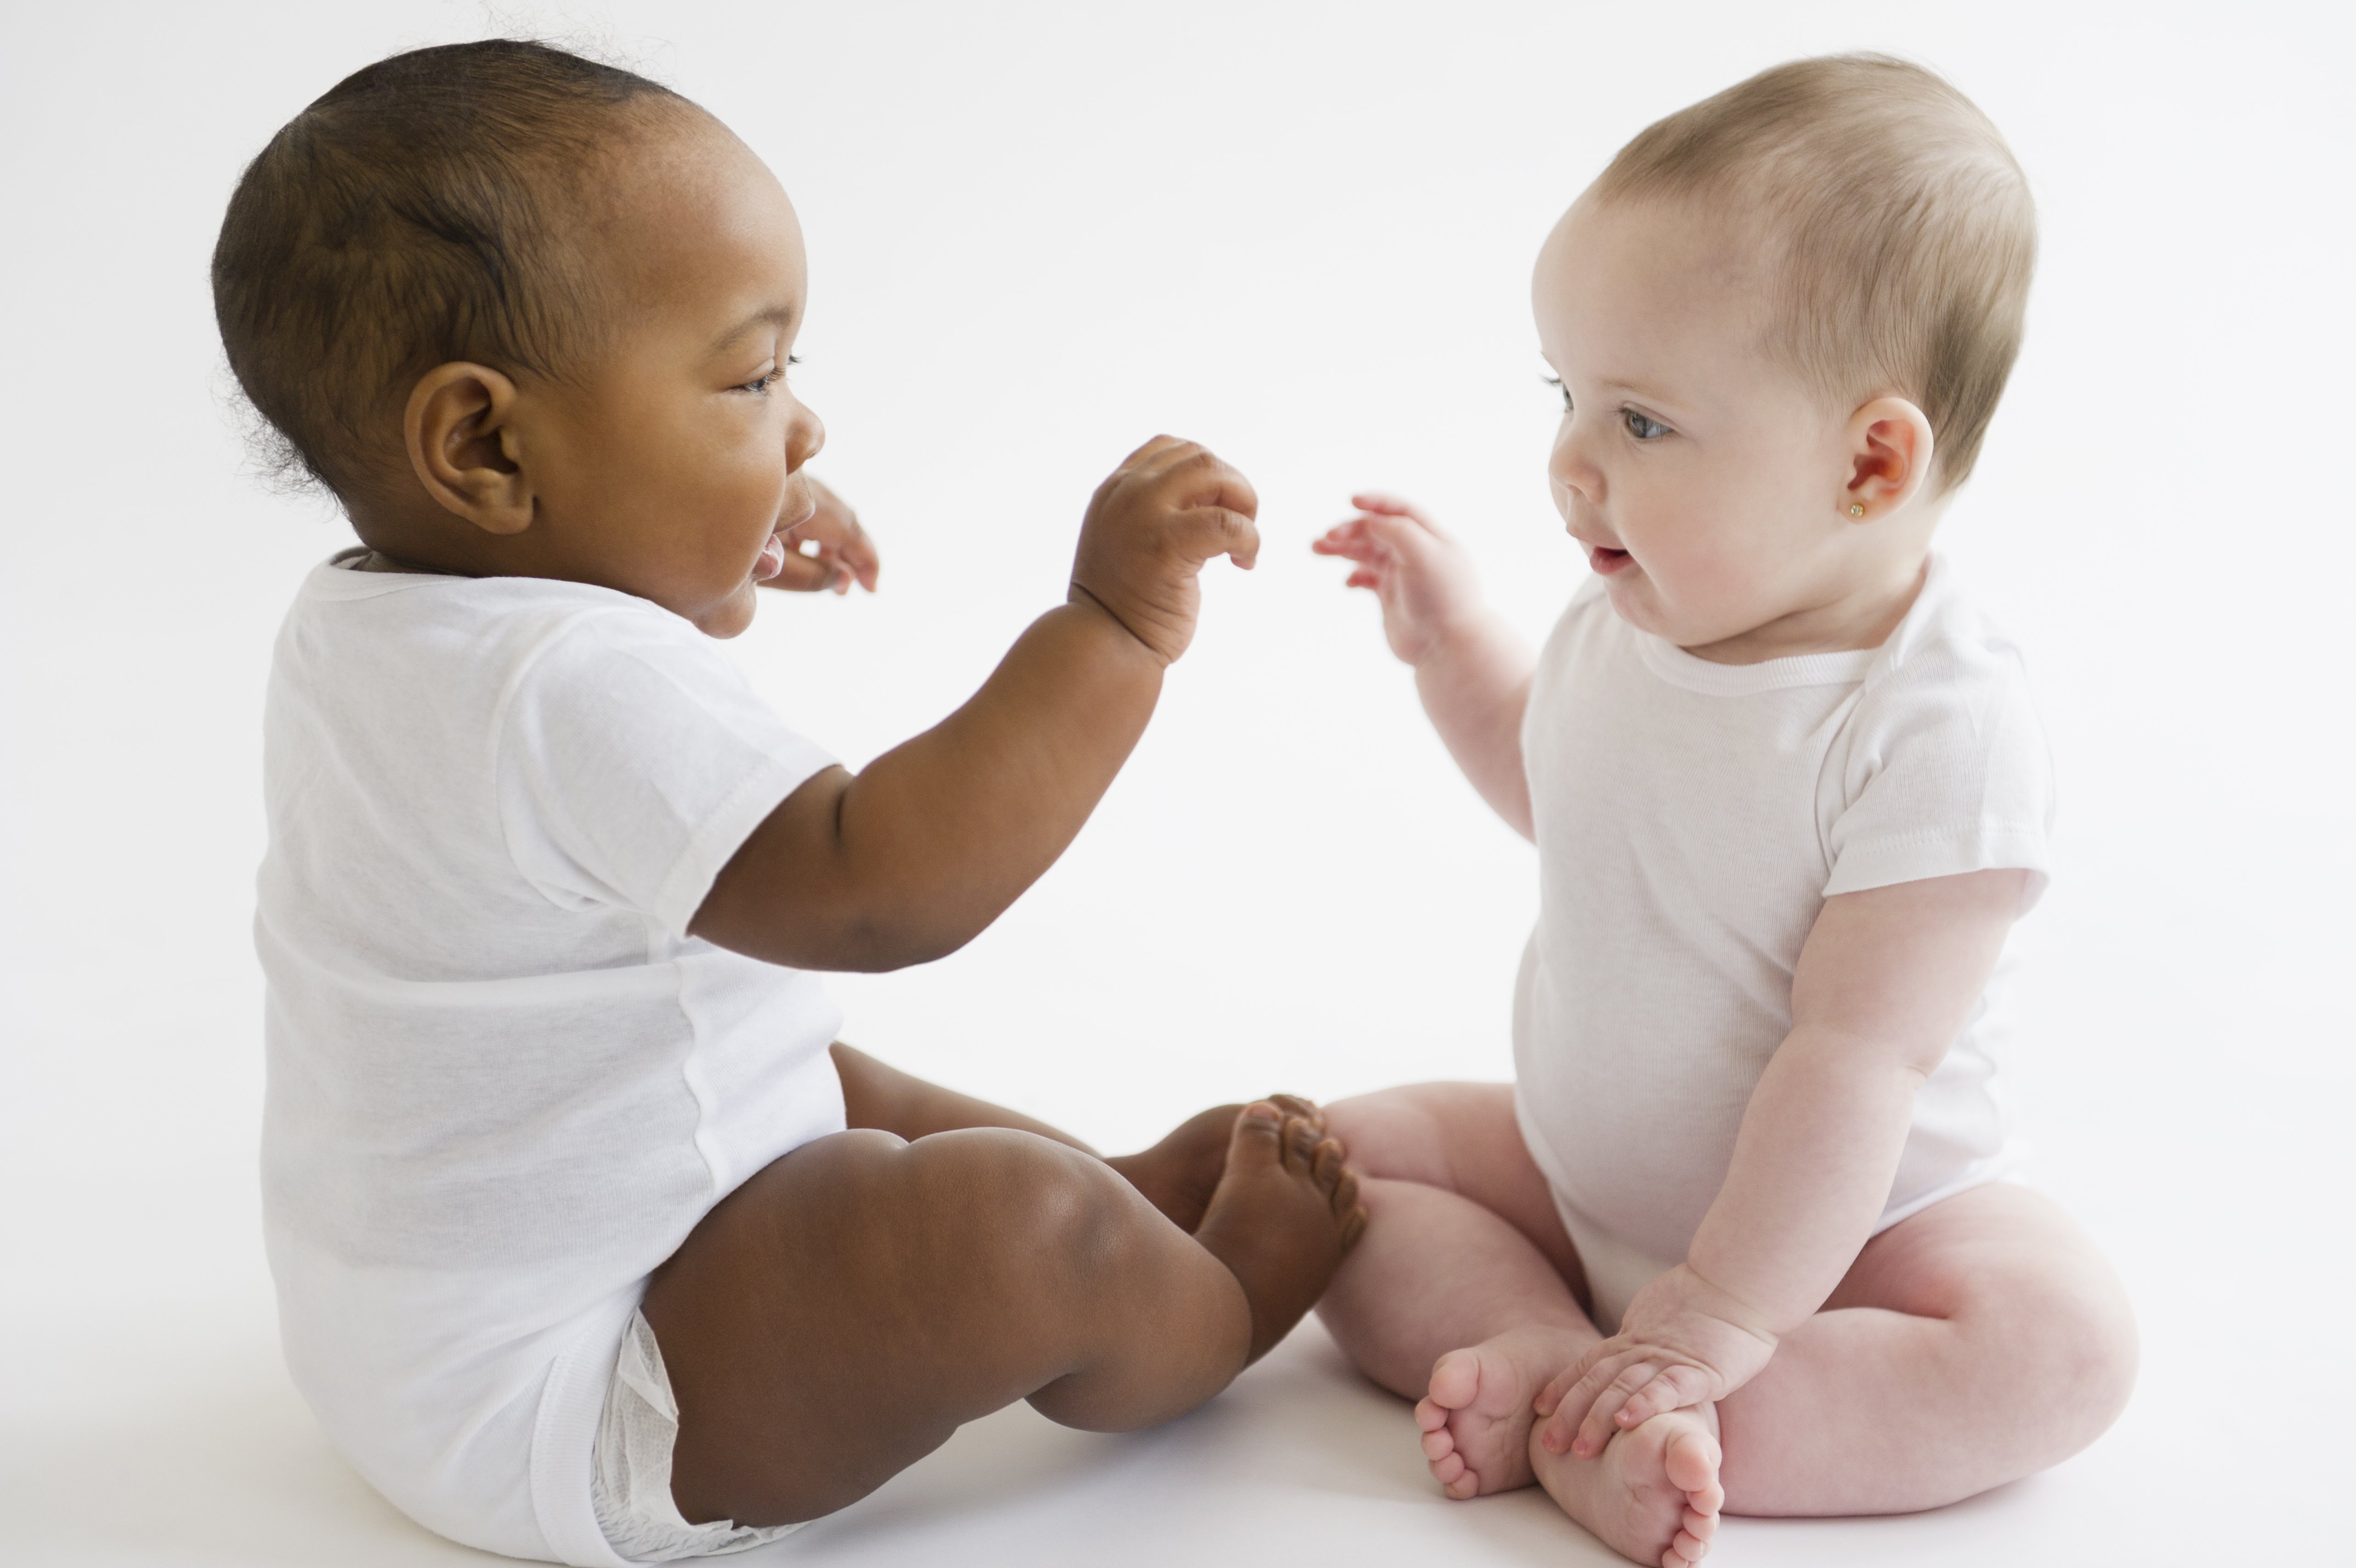 Two babies play together. | Source: Getty Images